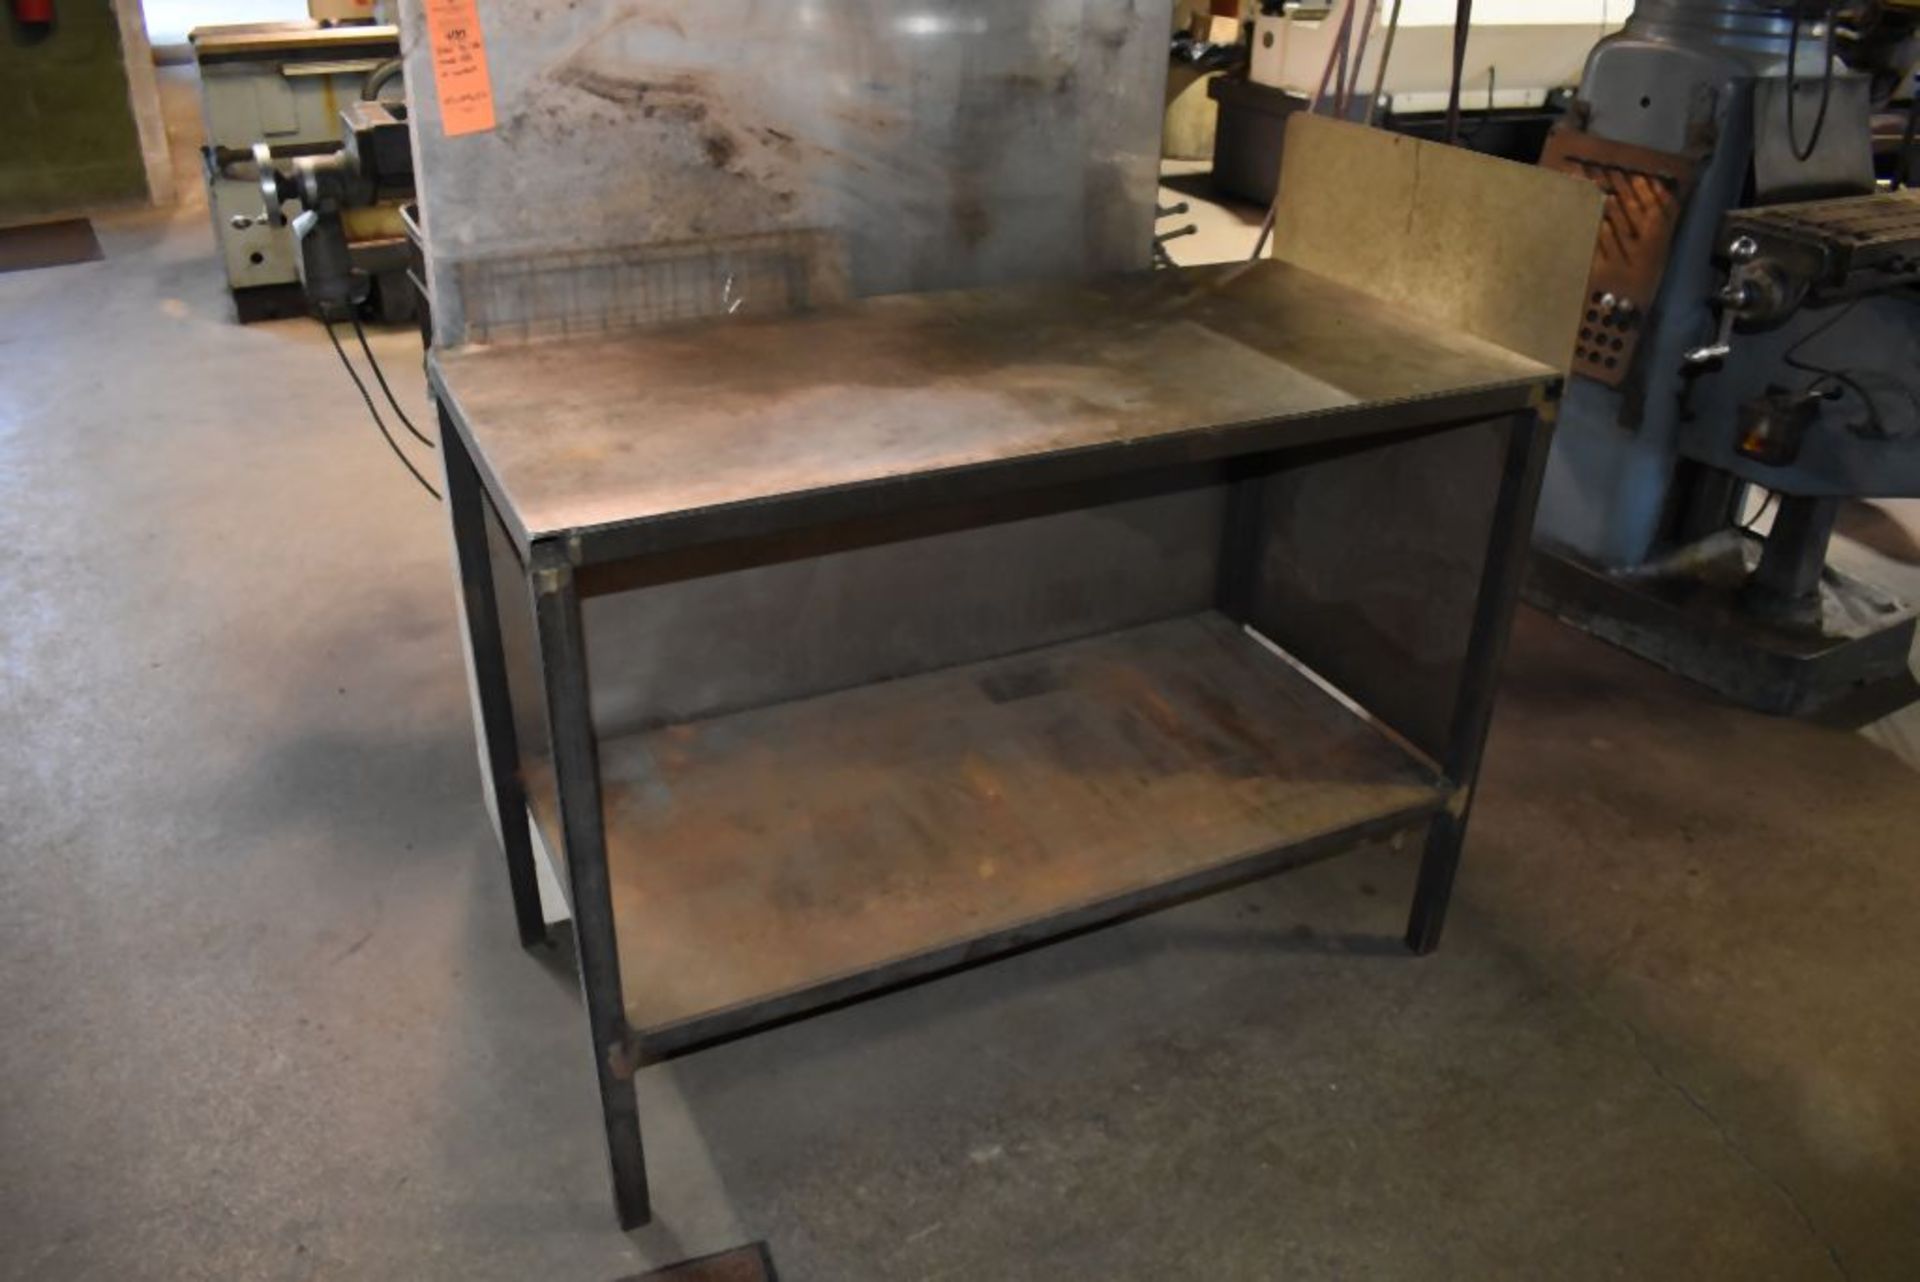 STEEL TWO TIER WORK TABLE, NO CONTENTS, 50"L x 24"D x 37"H